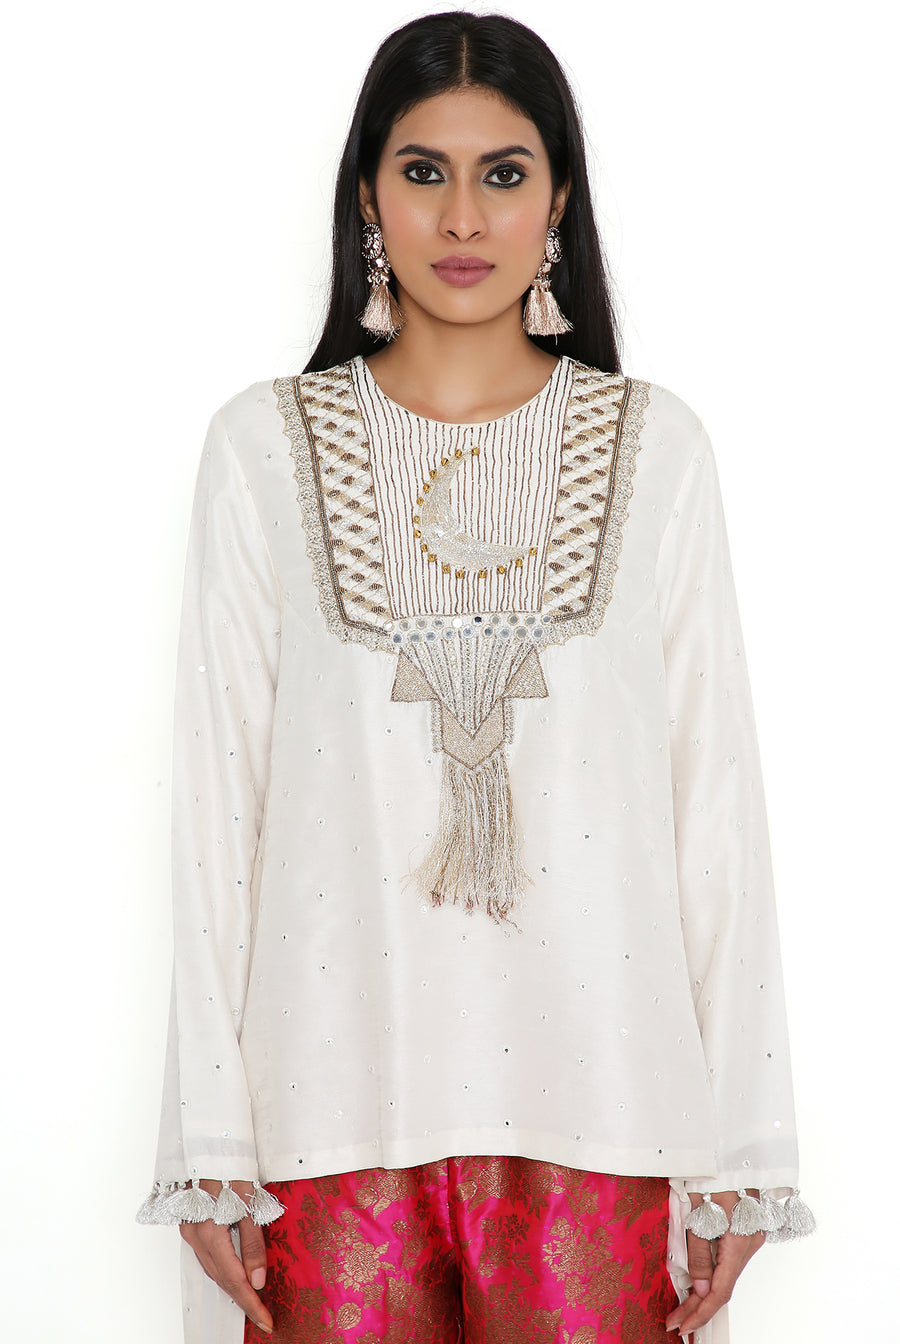 Off-White High Low Kurta With Pink Pant